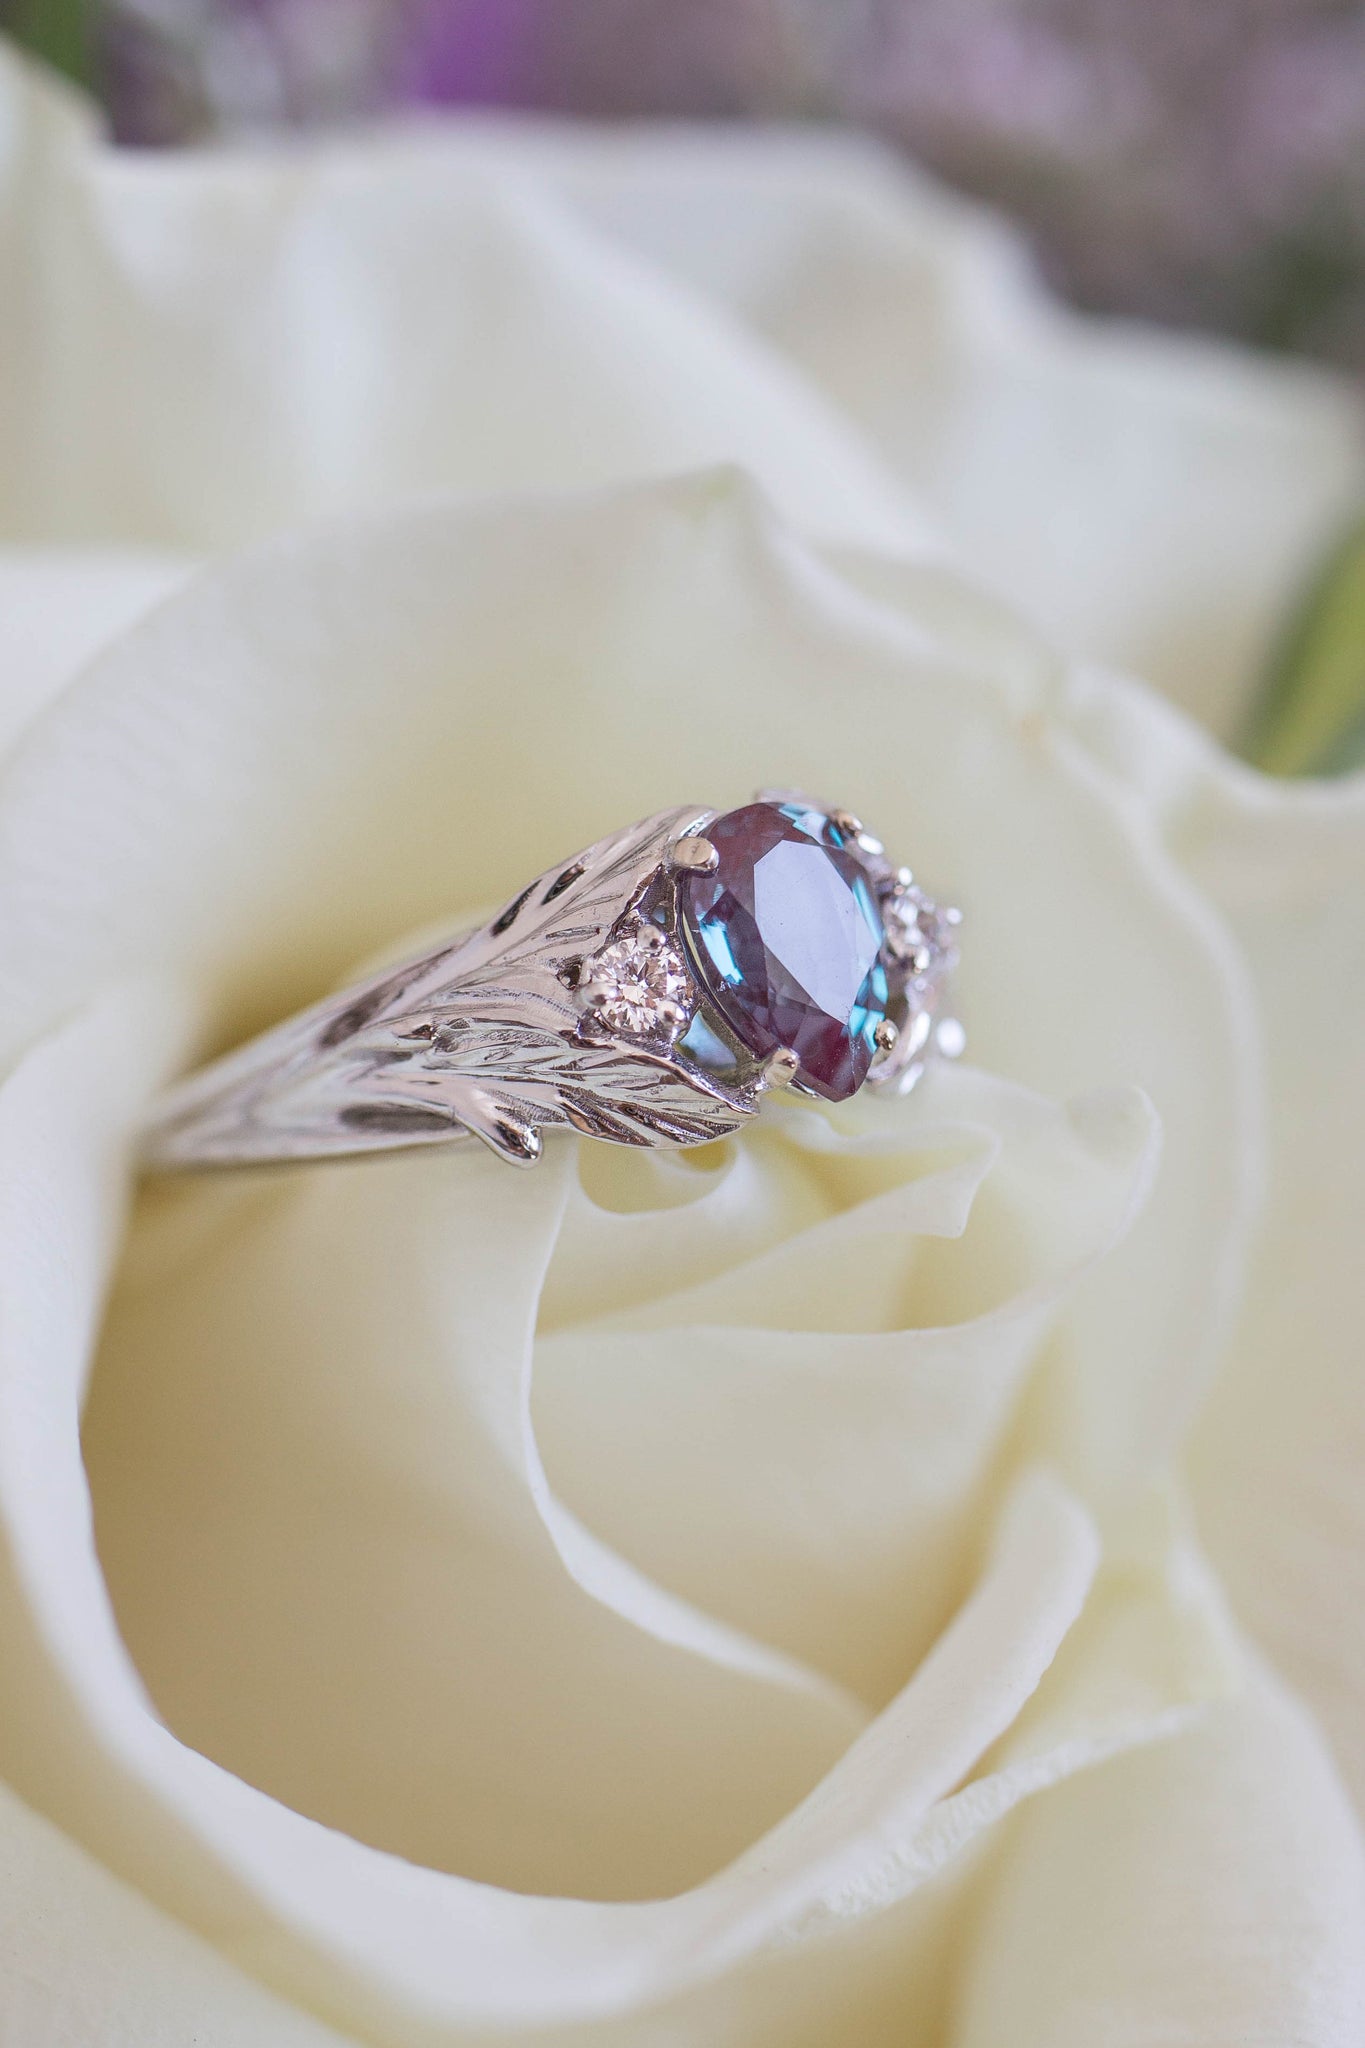 READY TO SHIP: Wisteria in 14K white gold, pear alexandrite 7x5 mm, diamonds, AVAILABLE RING SIZES - 6 US, 8 US - Eden Garden Jewelry™